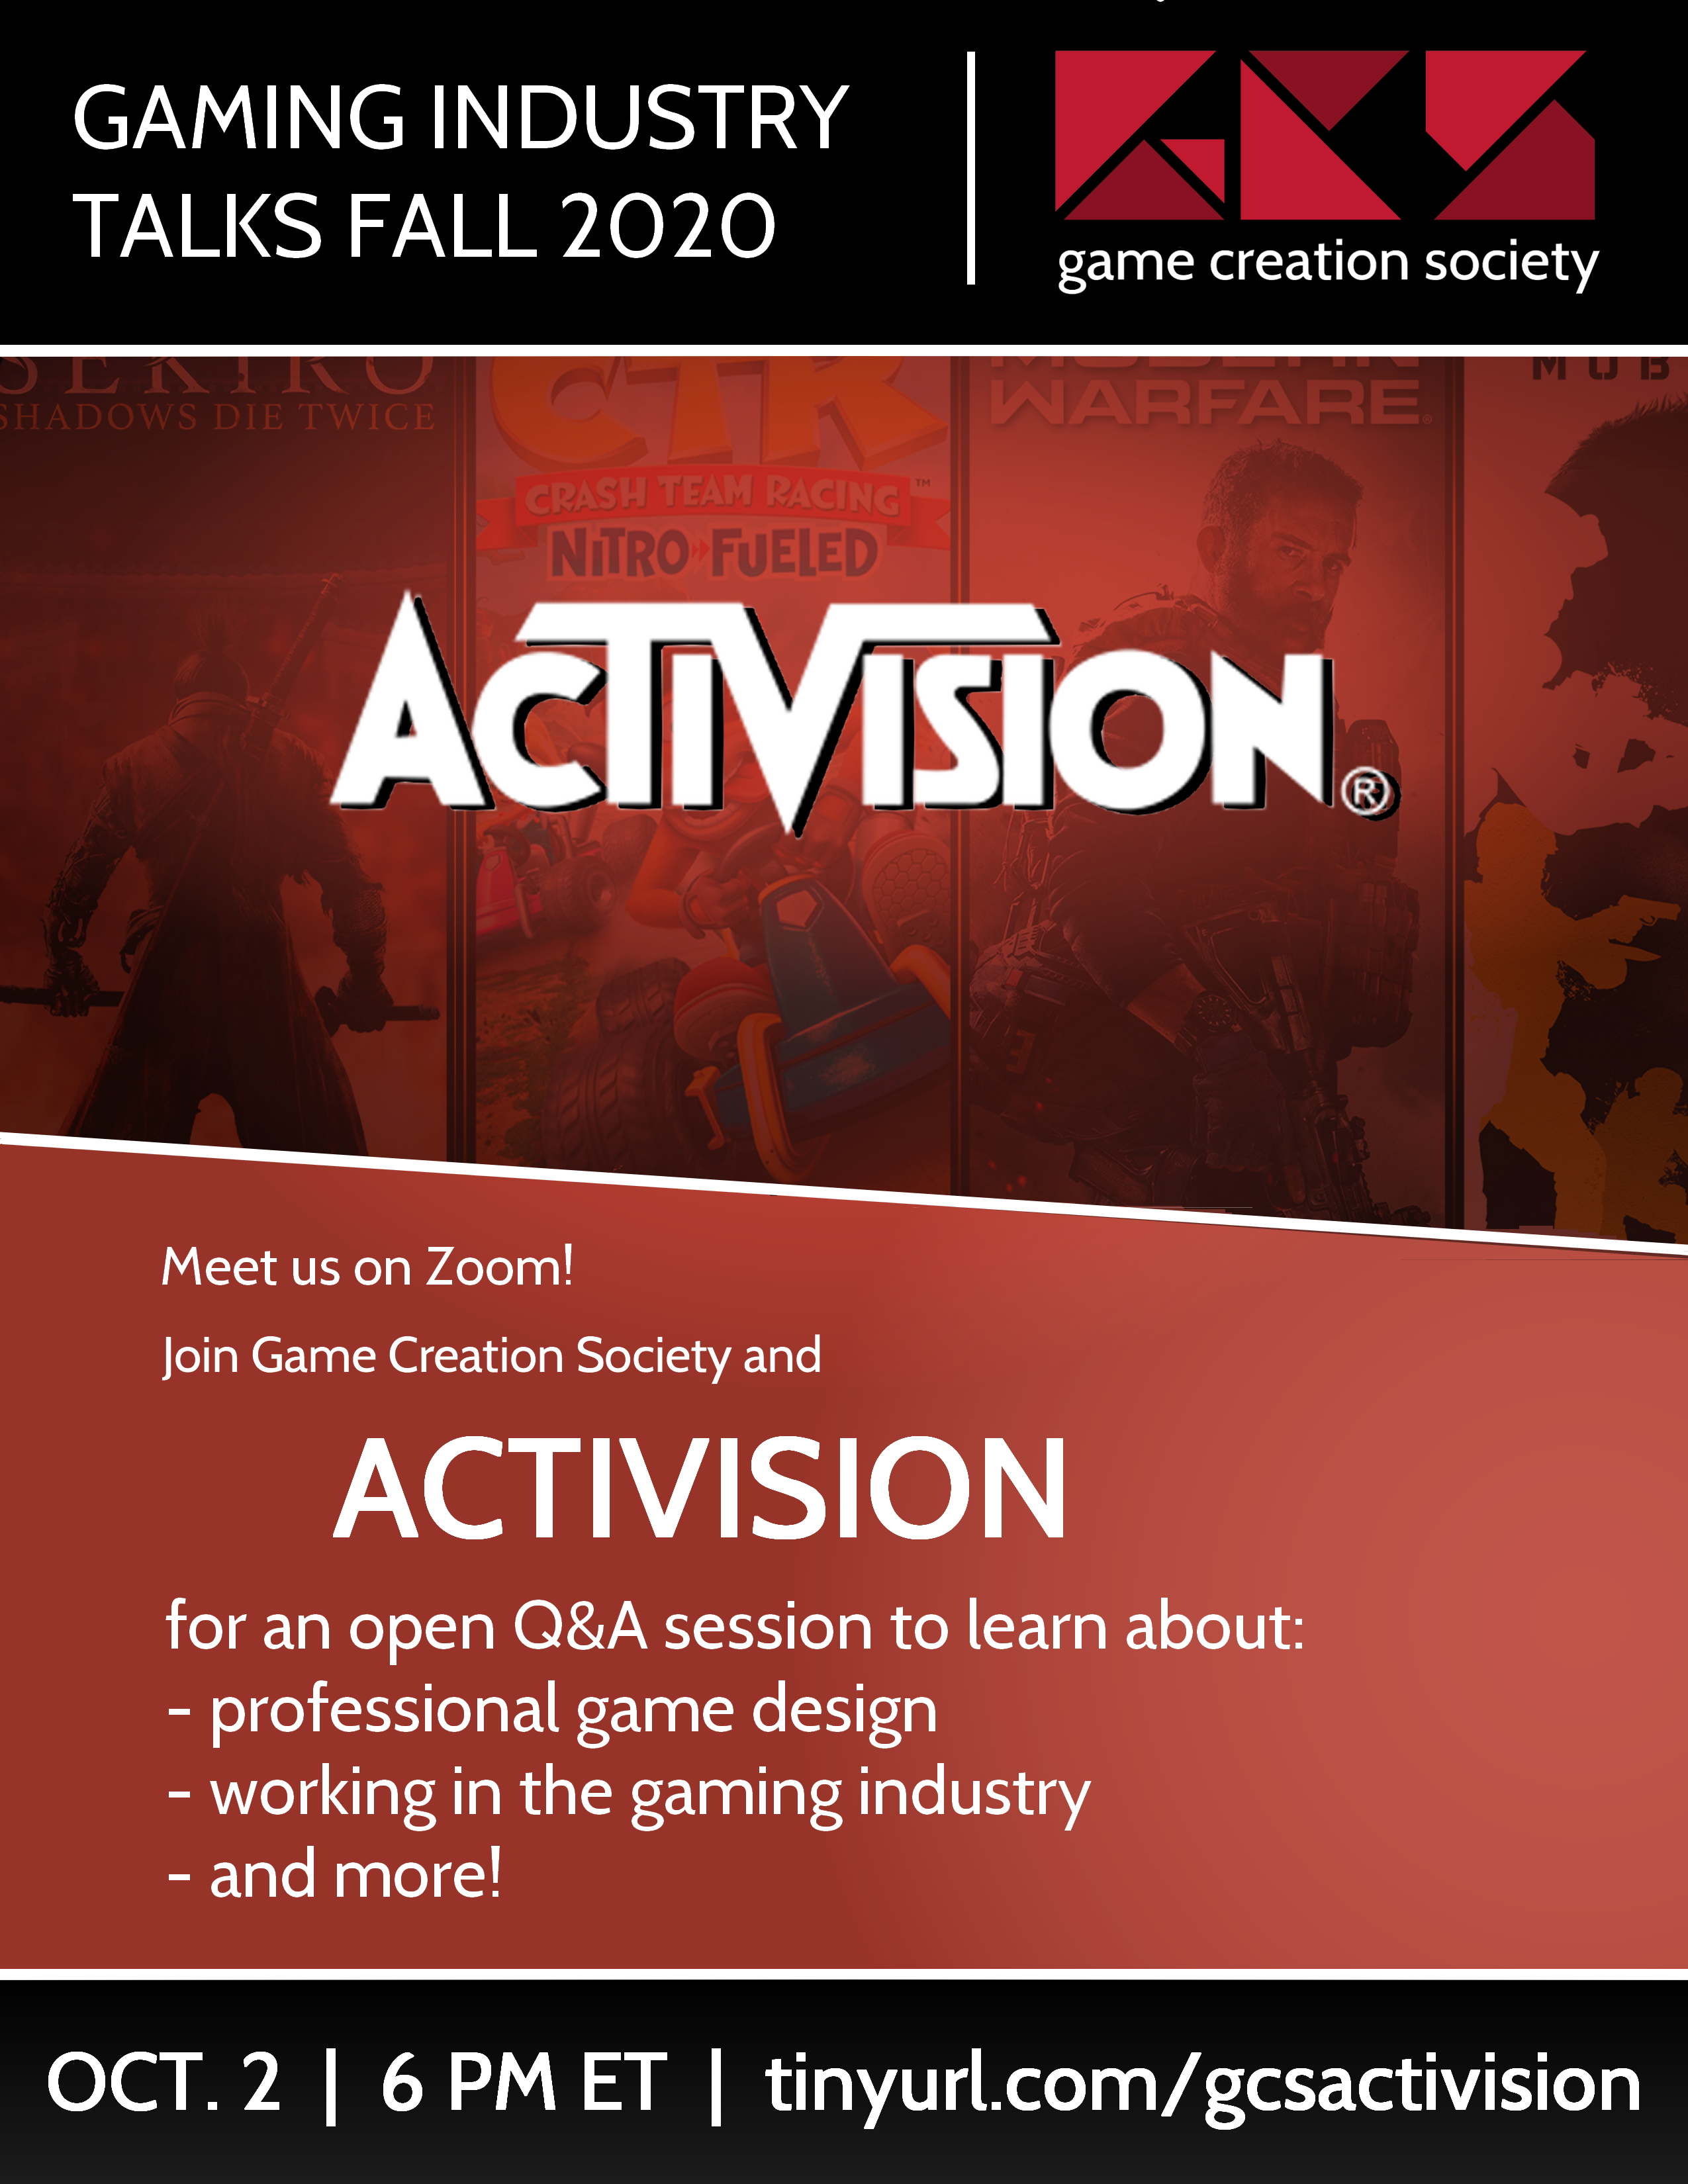 f20-activision-talk-poster.png